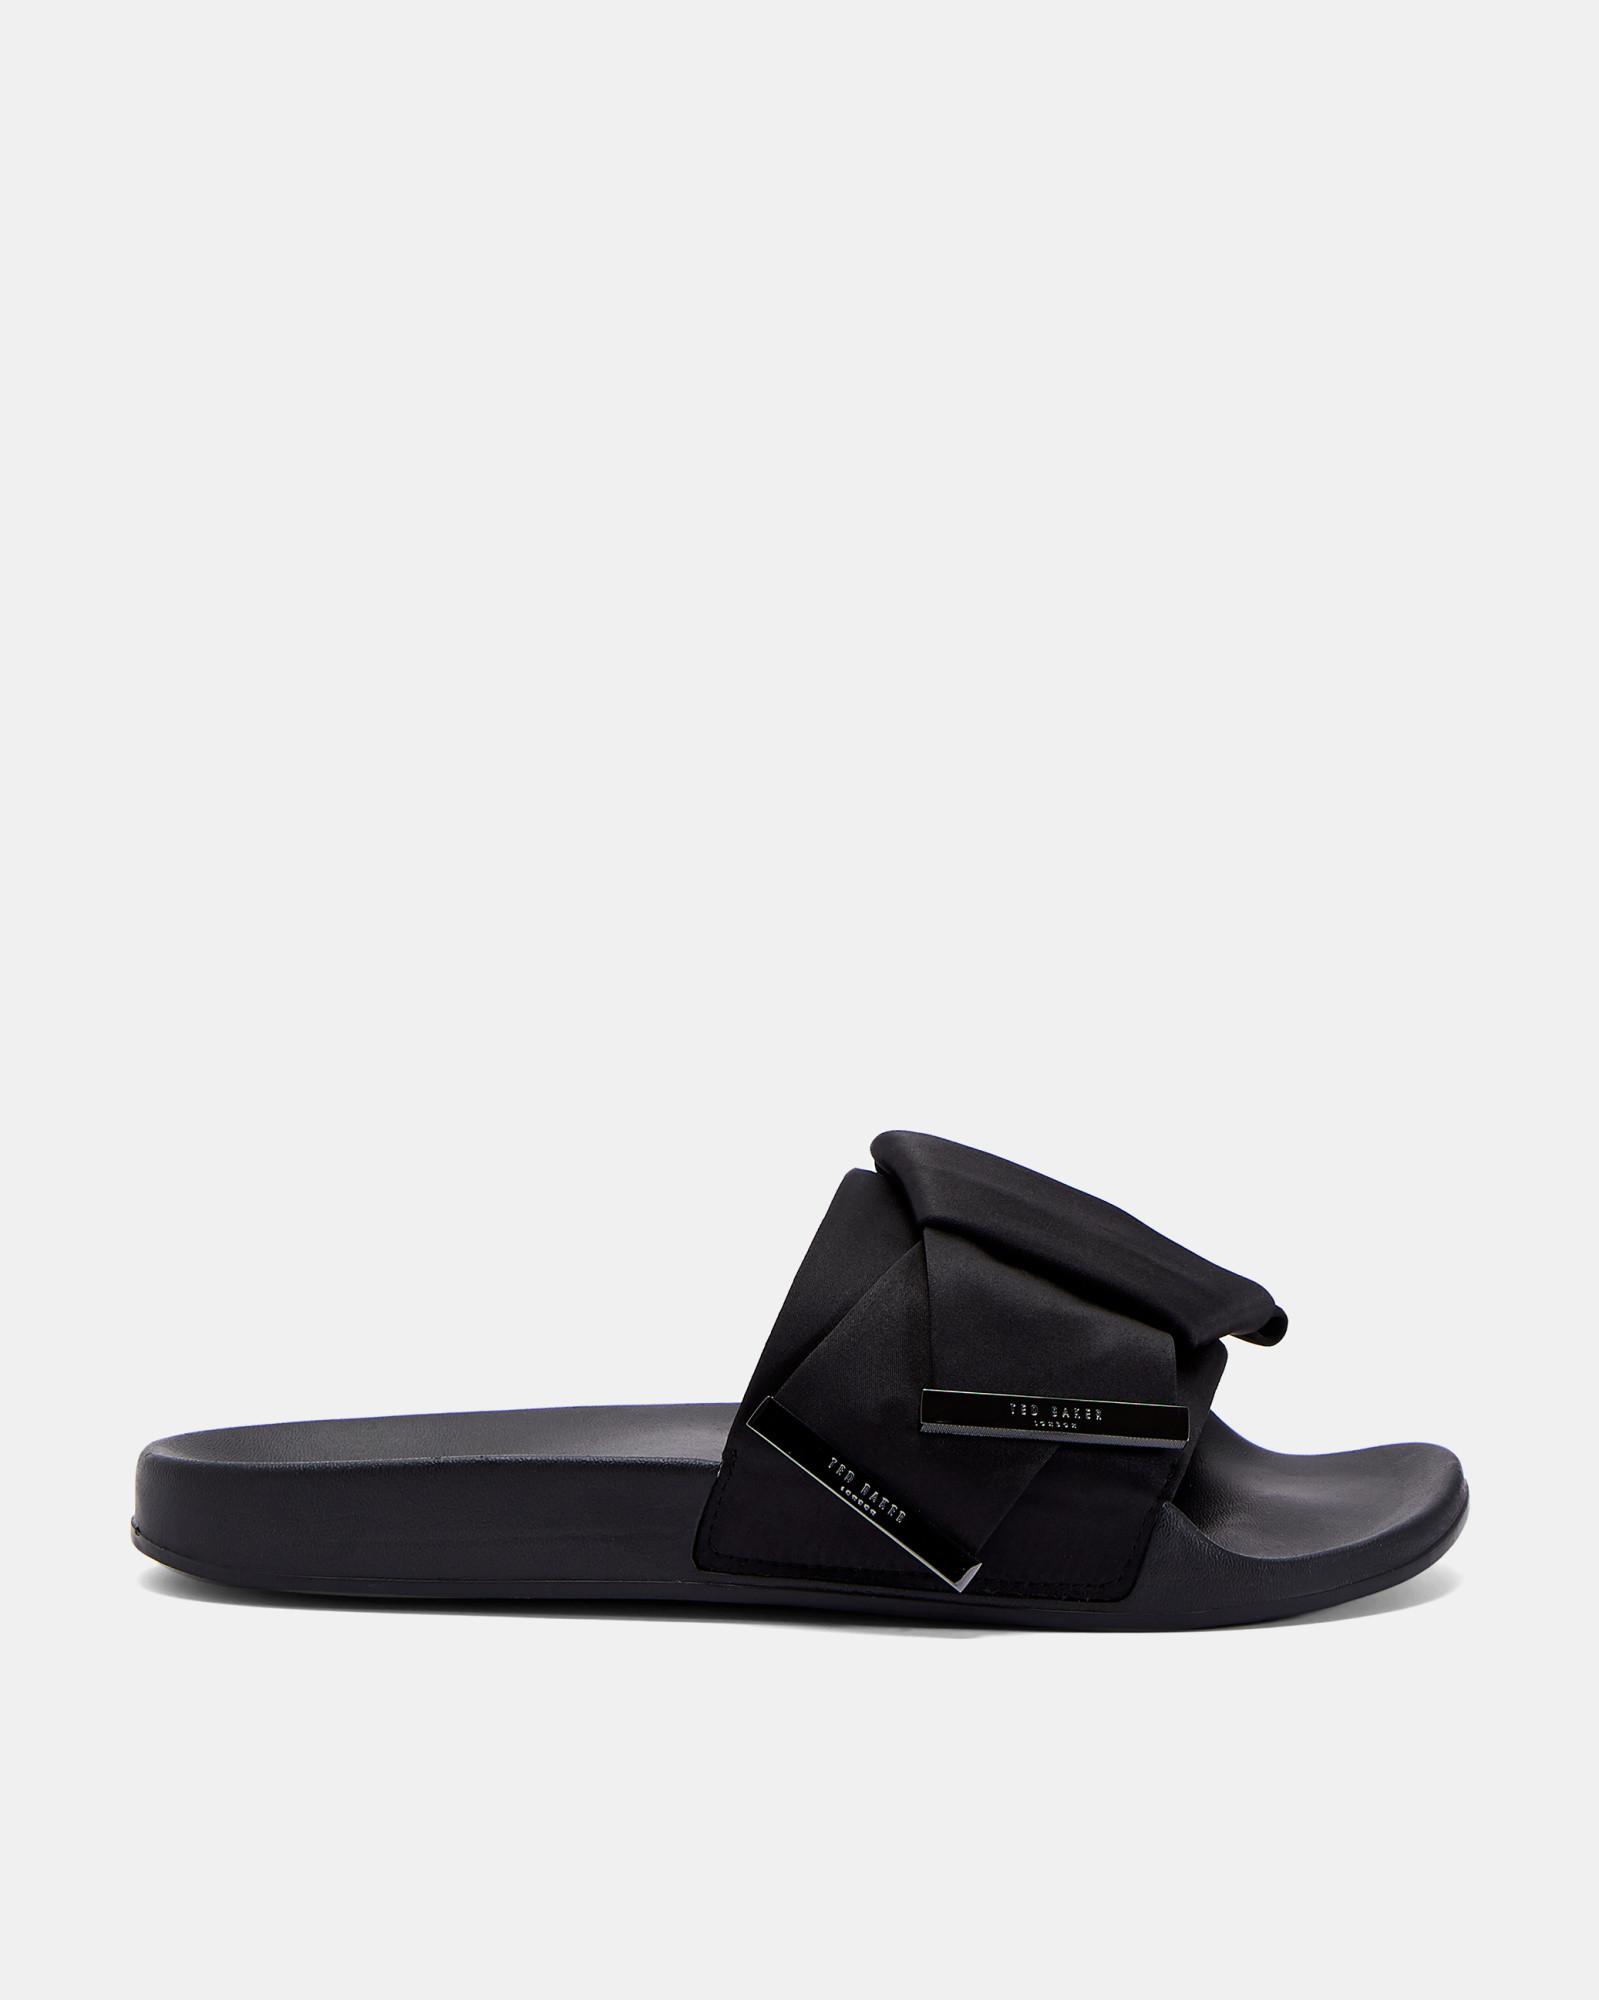 Ted Baker Knotted Bow Sliders in Black - Lyst